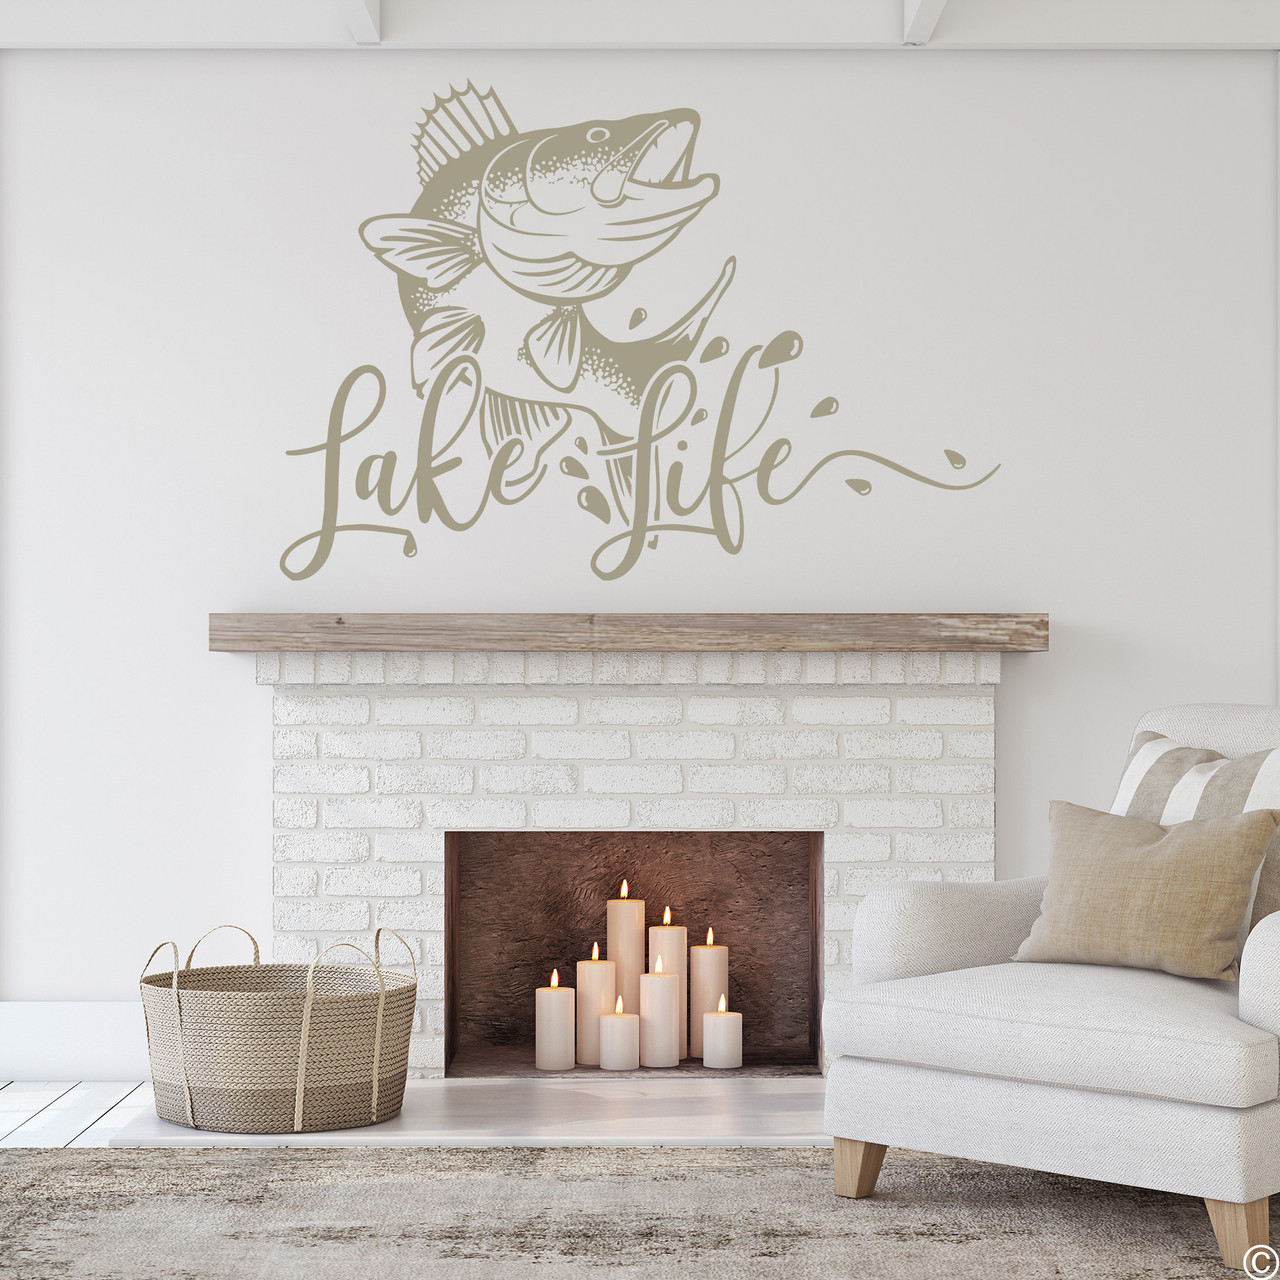 Lake Life with Walleye Fish Wall Decal Quote